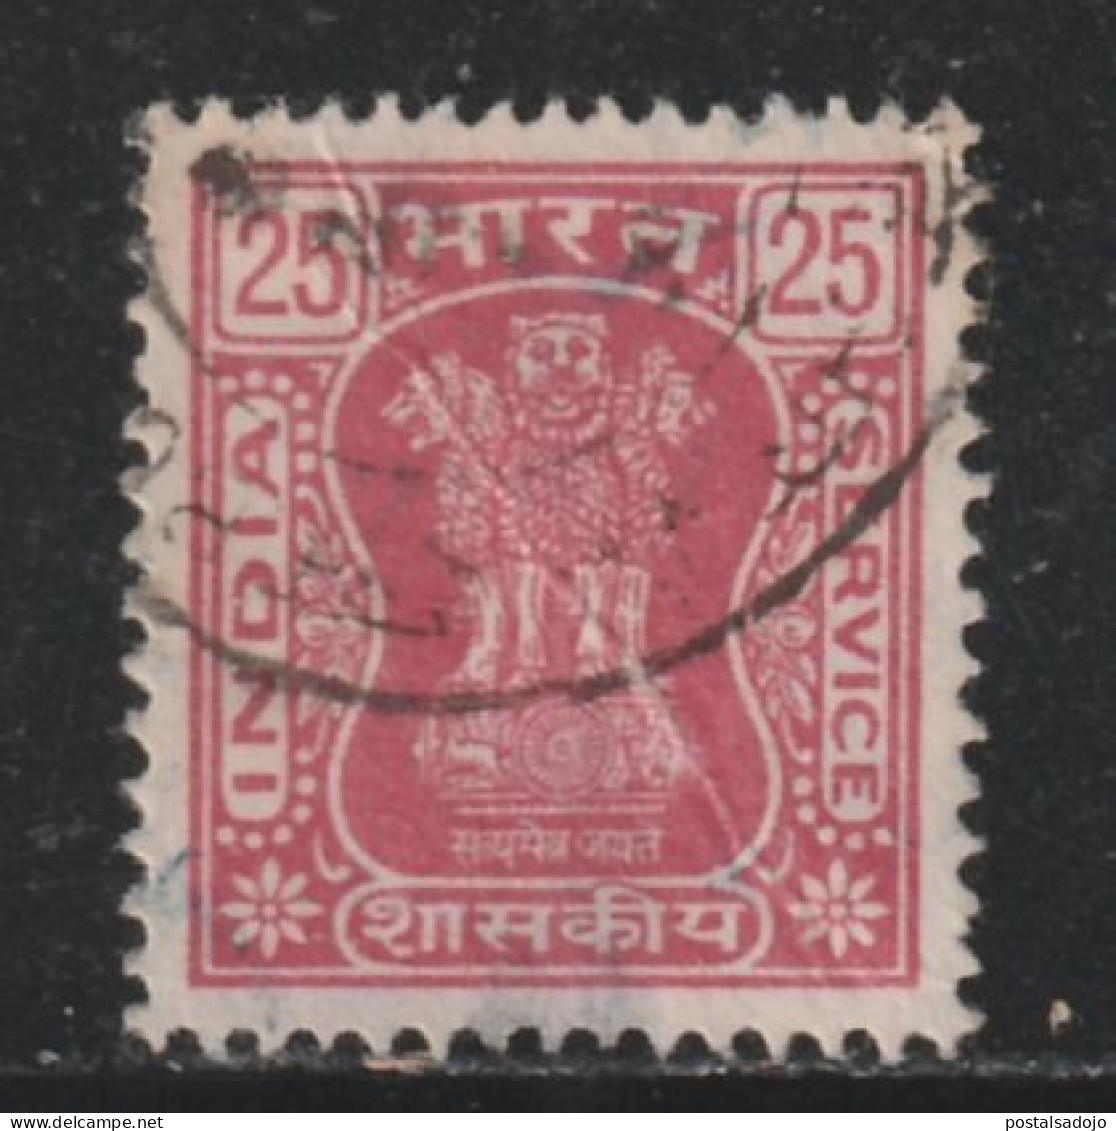 INDE 625 // YVERT  58  // 1970-81 - Official Stamps